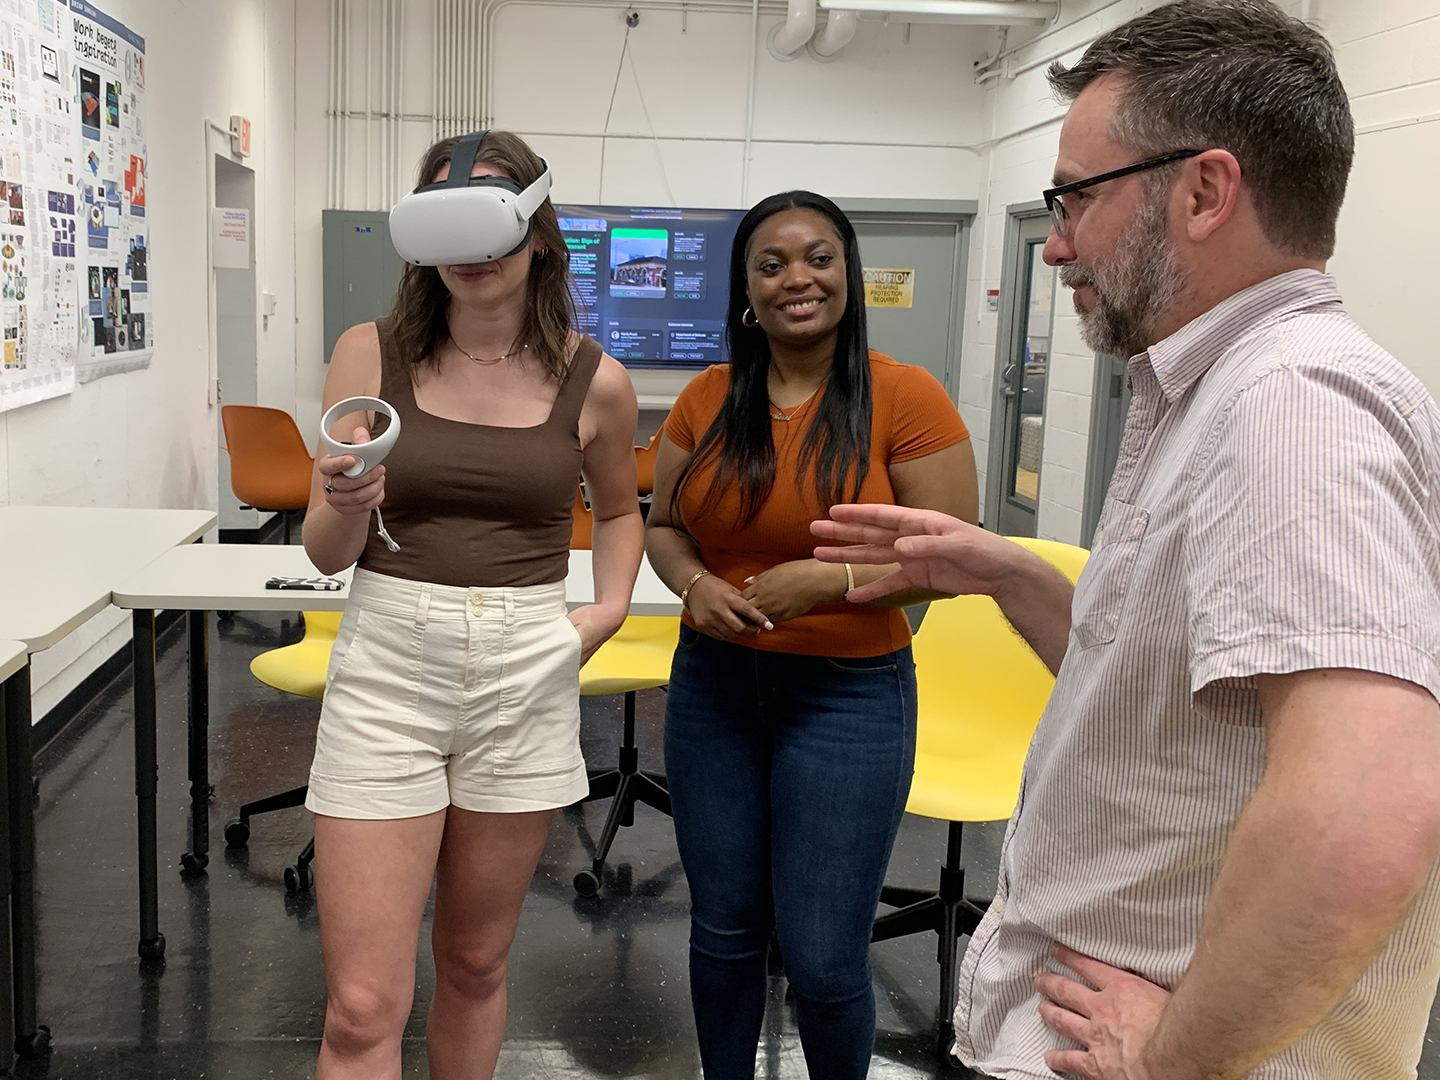 Two college students and a professor discussing a VR experience. One student is wearing a VR headset